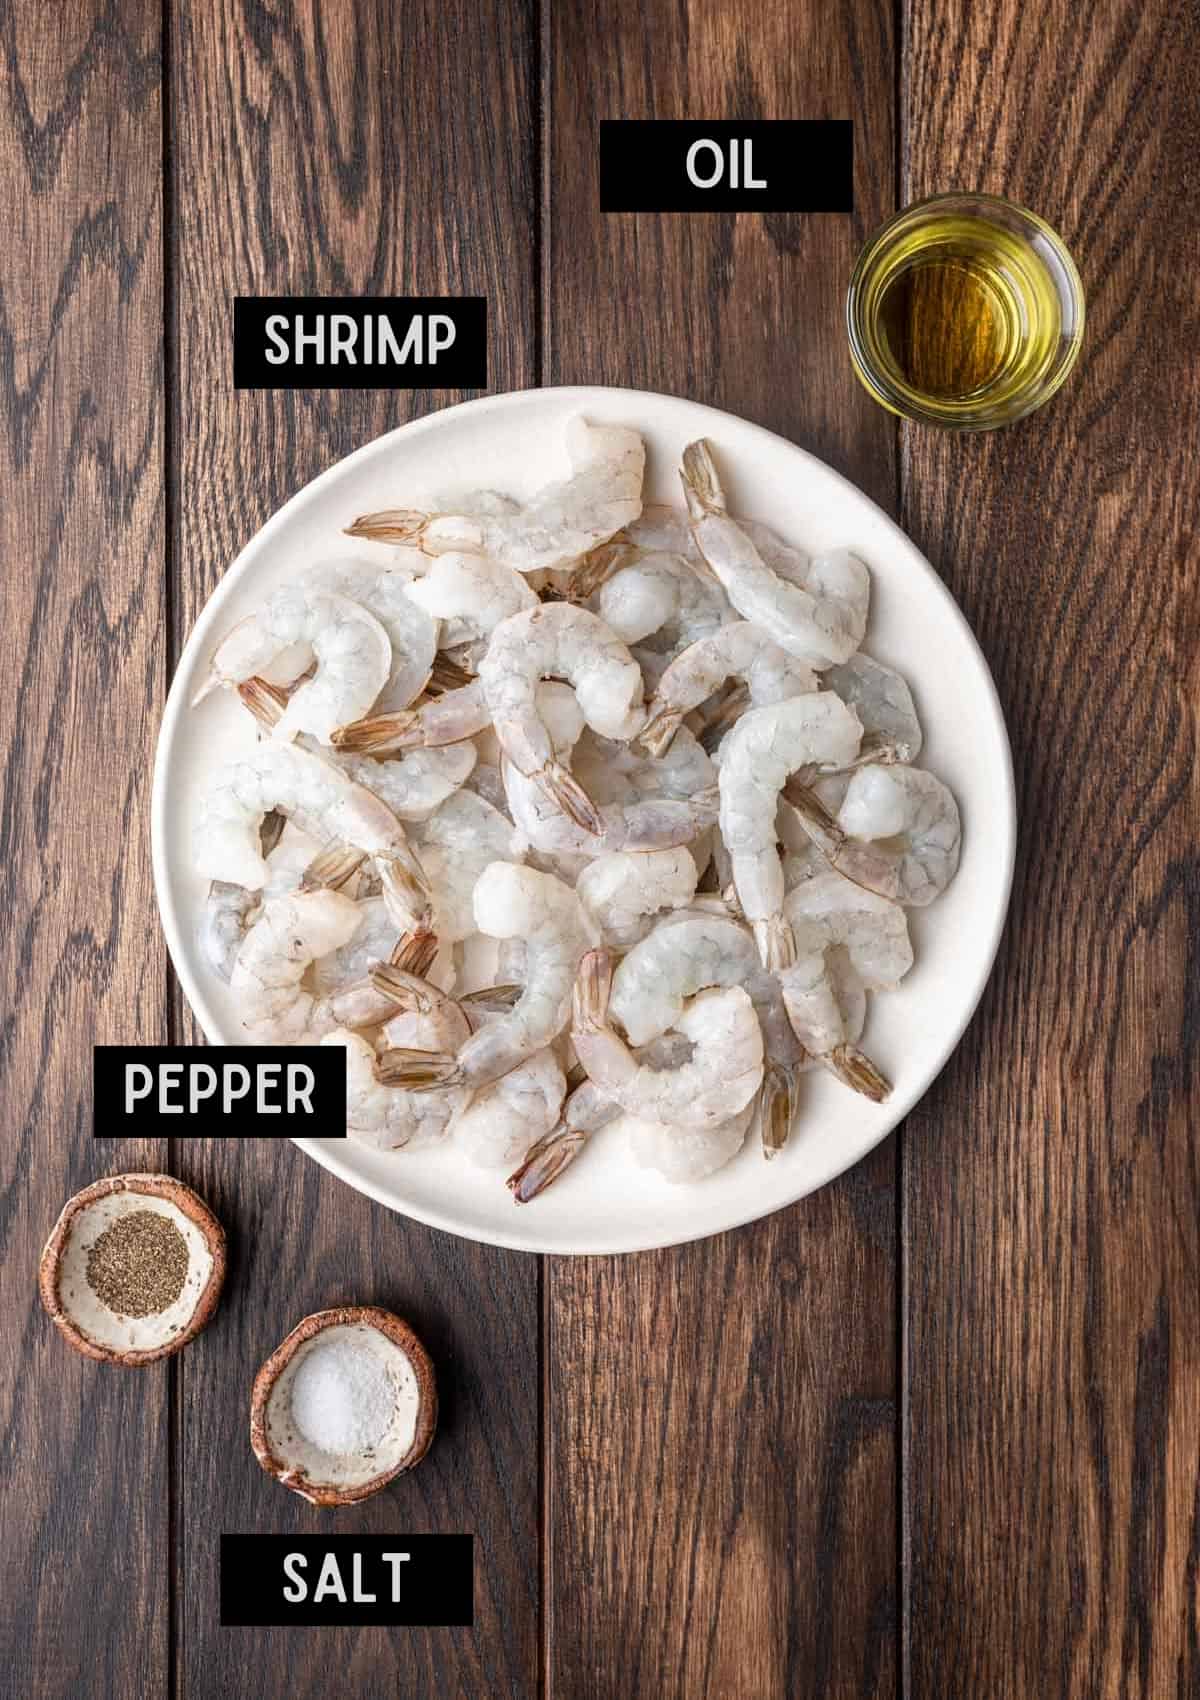 Labelled ingredients for smoked shrimp (see recipe for details).